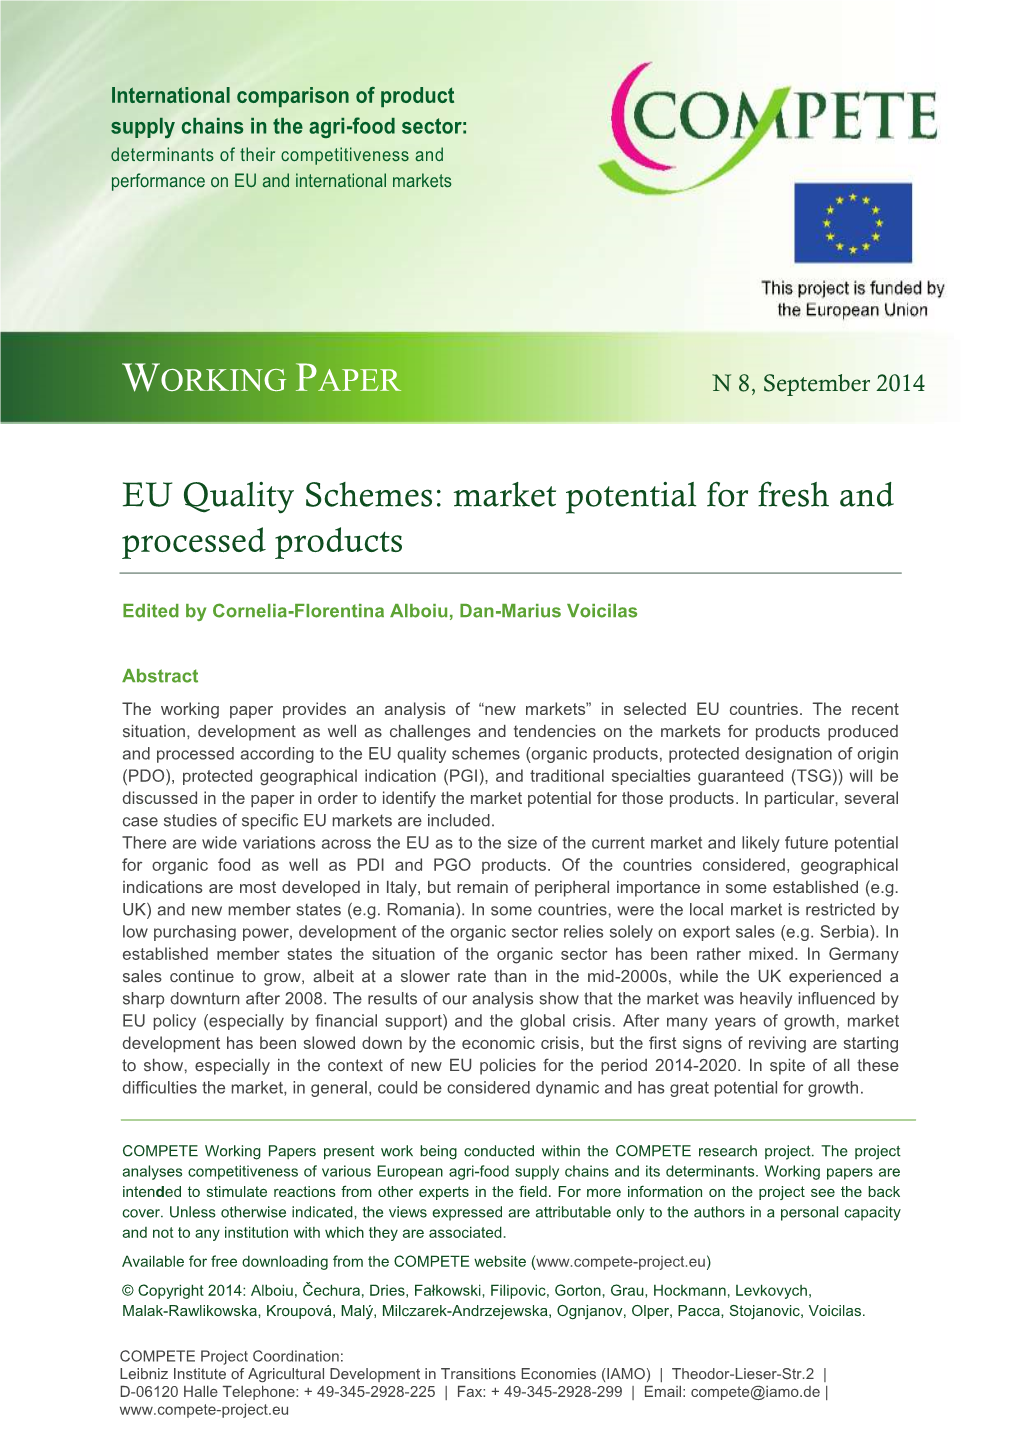 EU Quality Schemes: Market Potential for Fresh and Processed Products